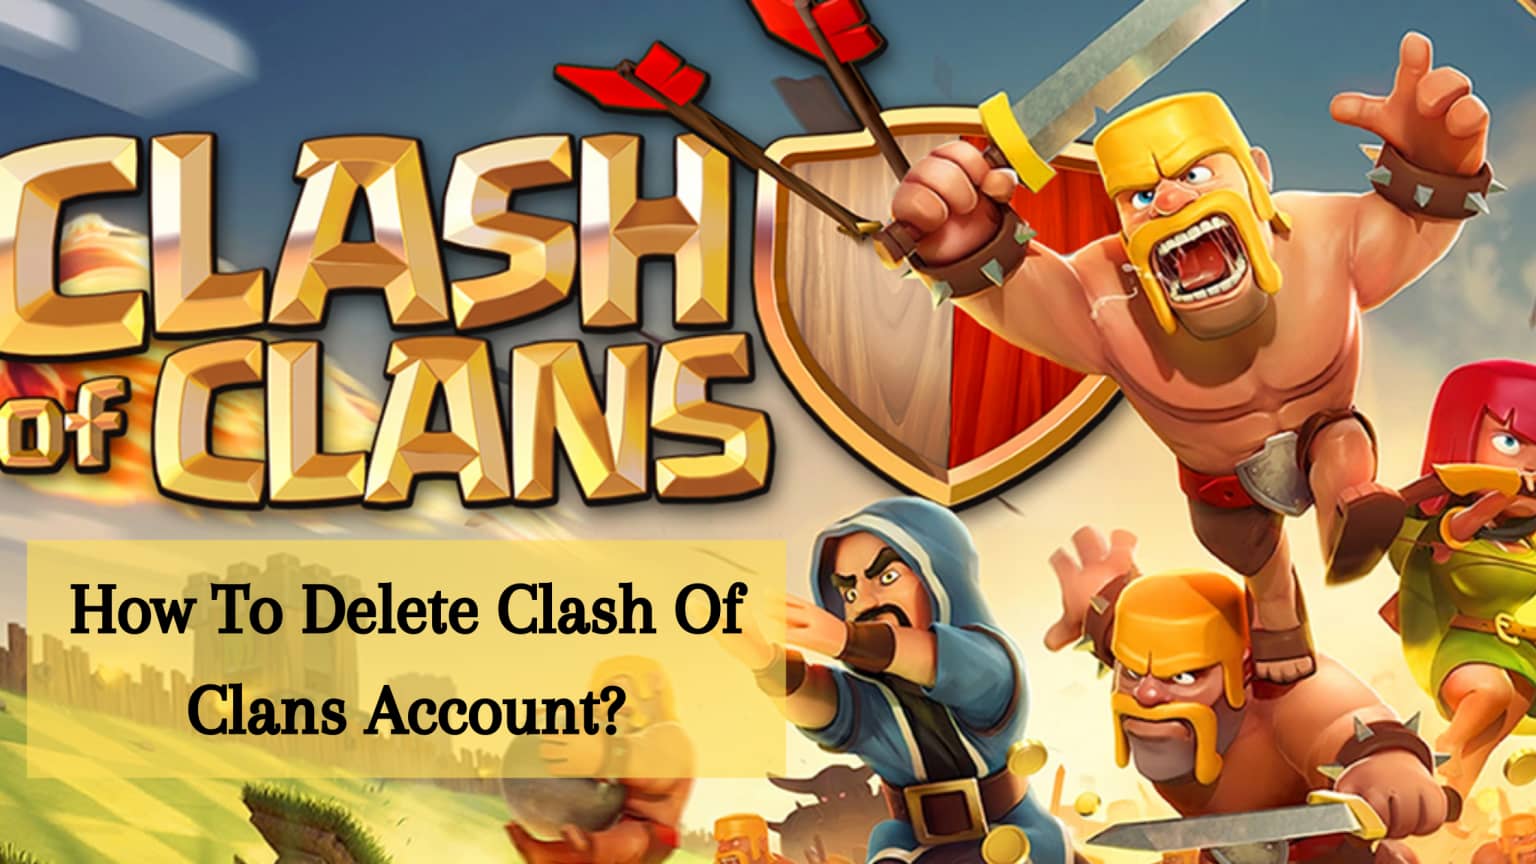 How To Delete Clash Of Clans Account?